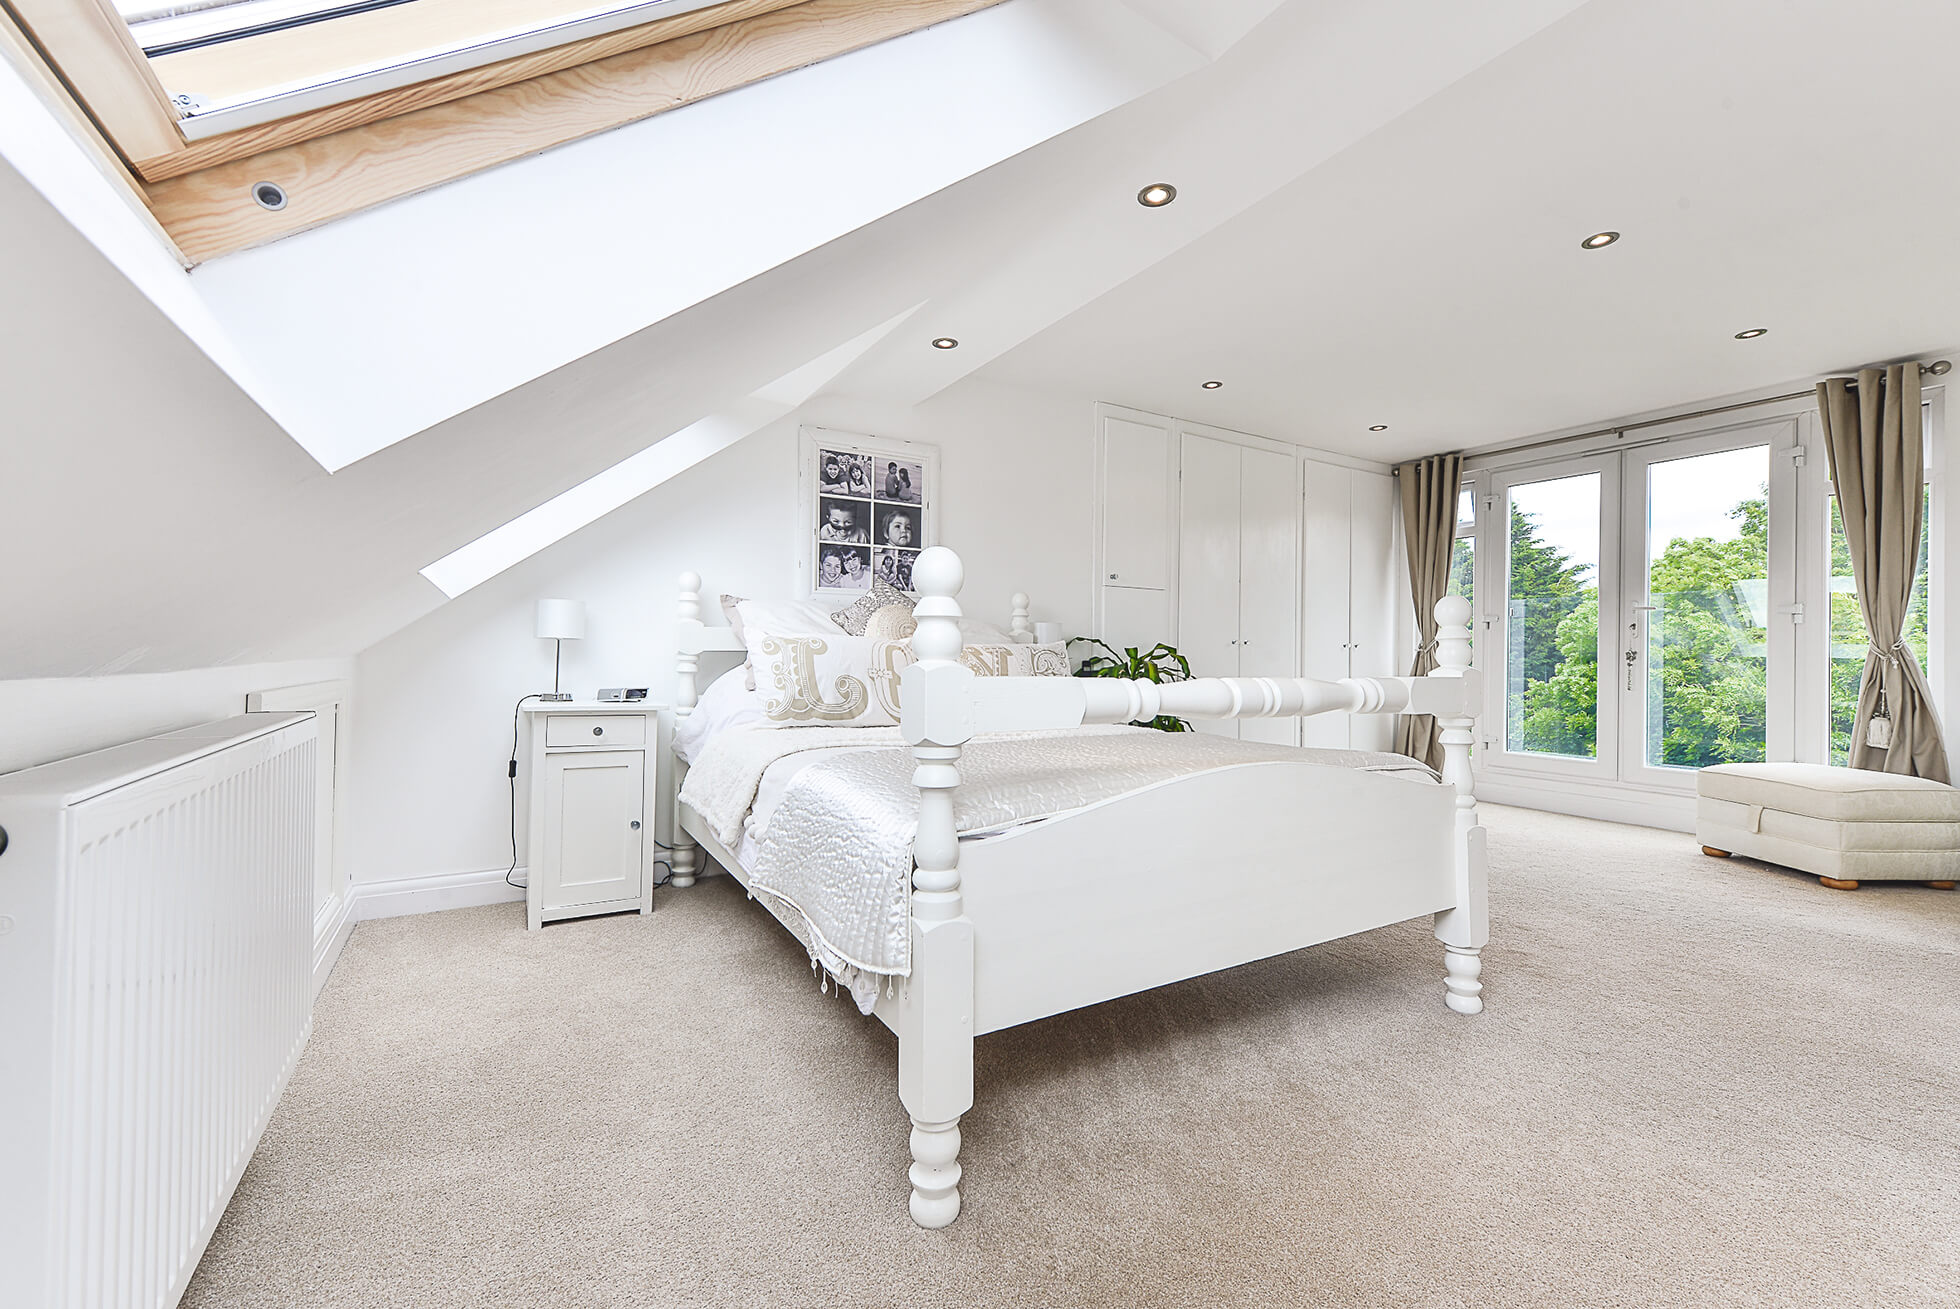 Do you have a question about converting your Loft in Lilley? Here are the most popular questions asked by our clients.